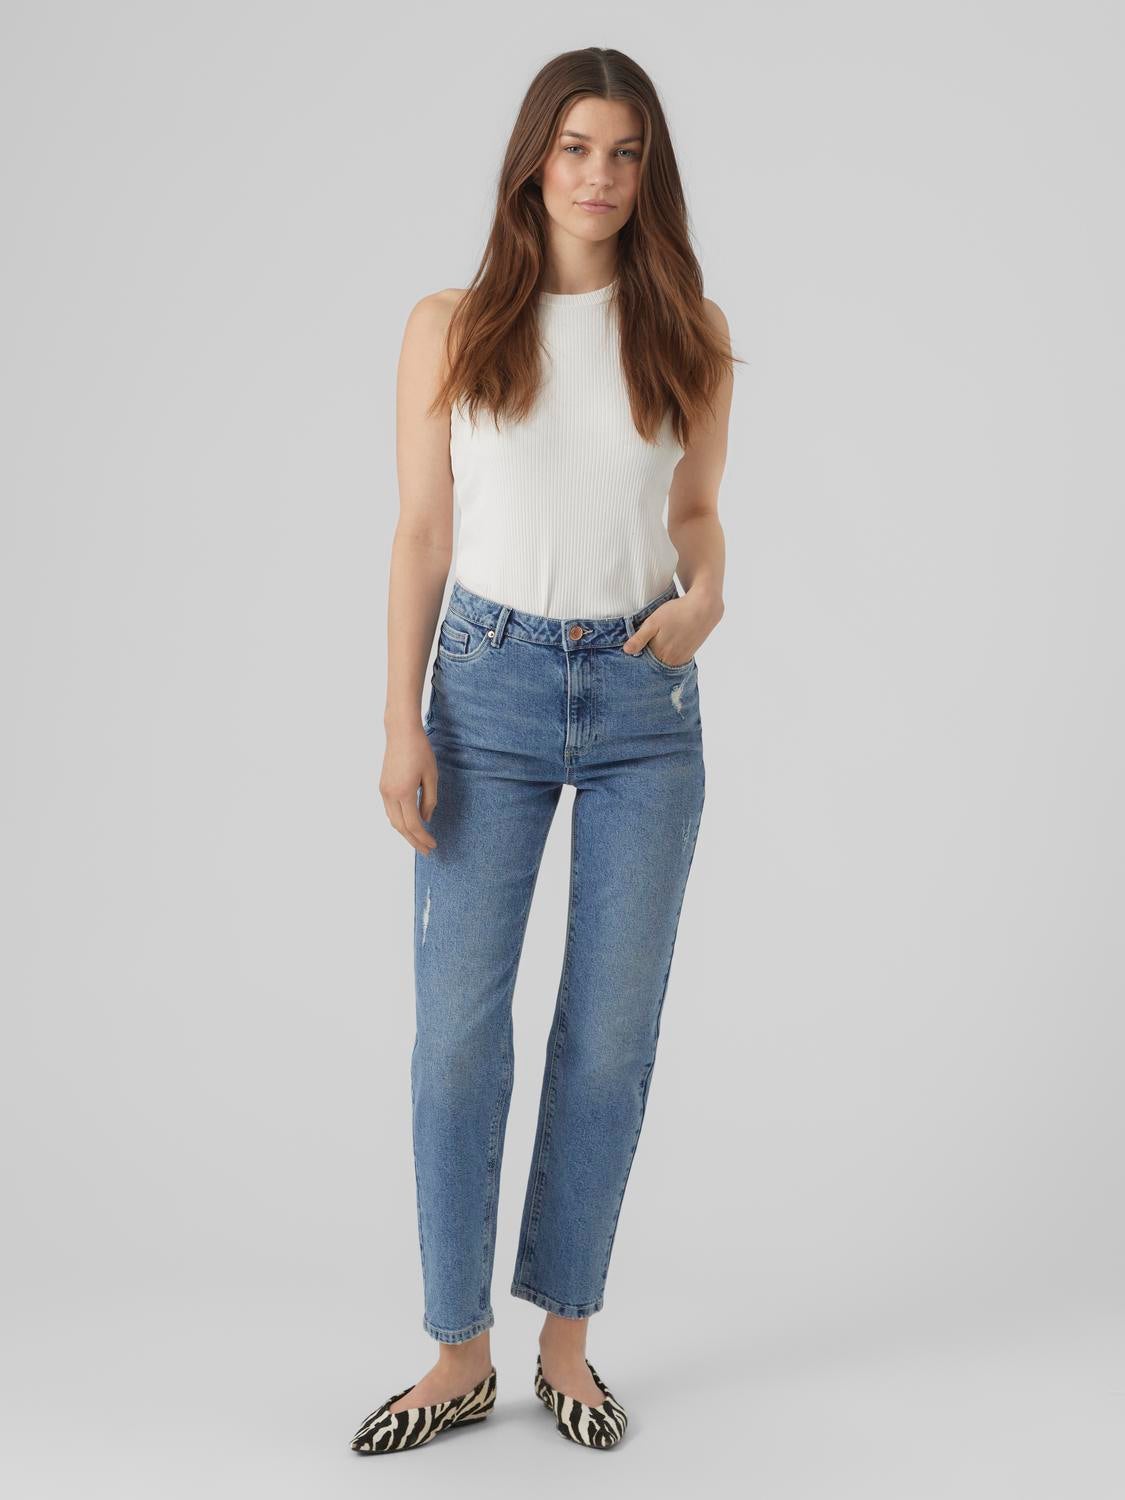 VMLINDA Hohe Taille Jeans